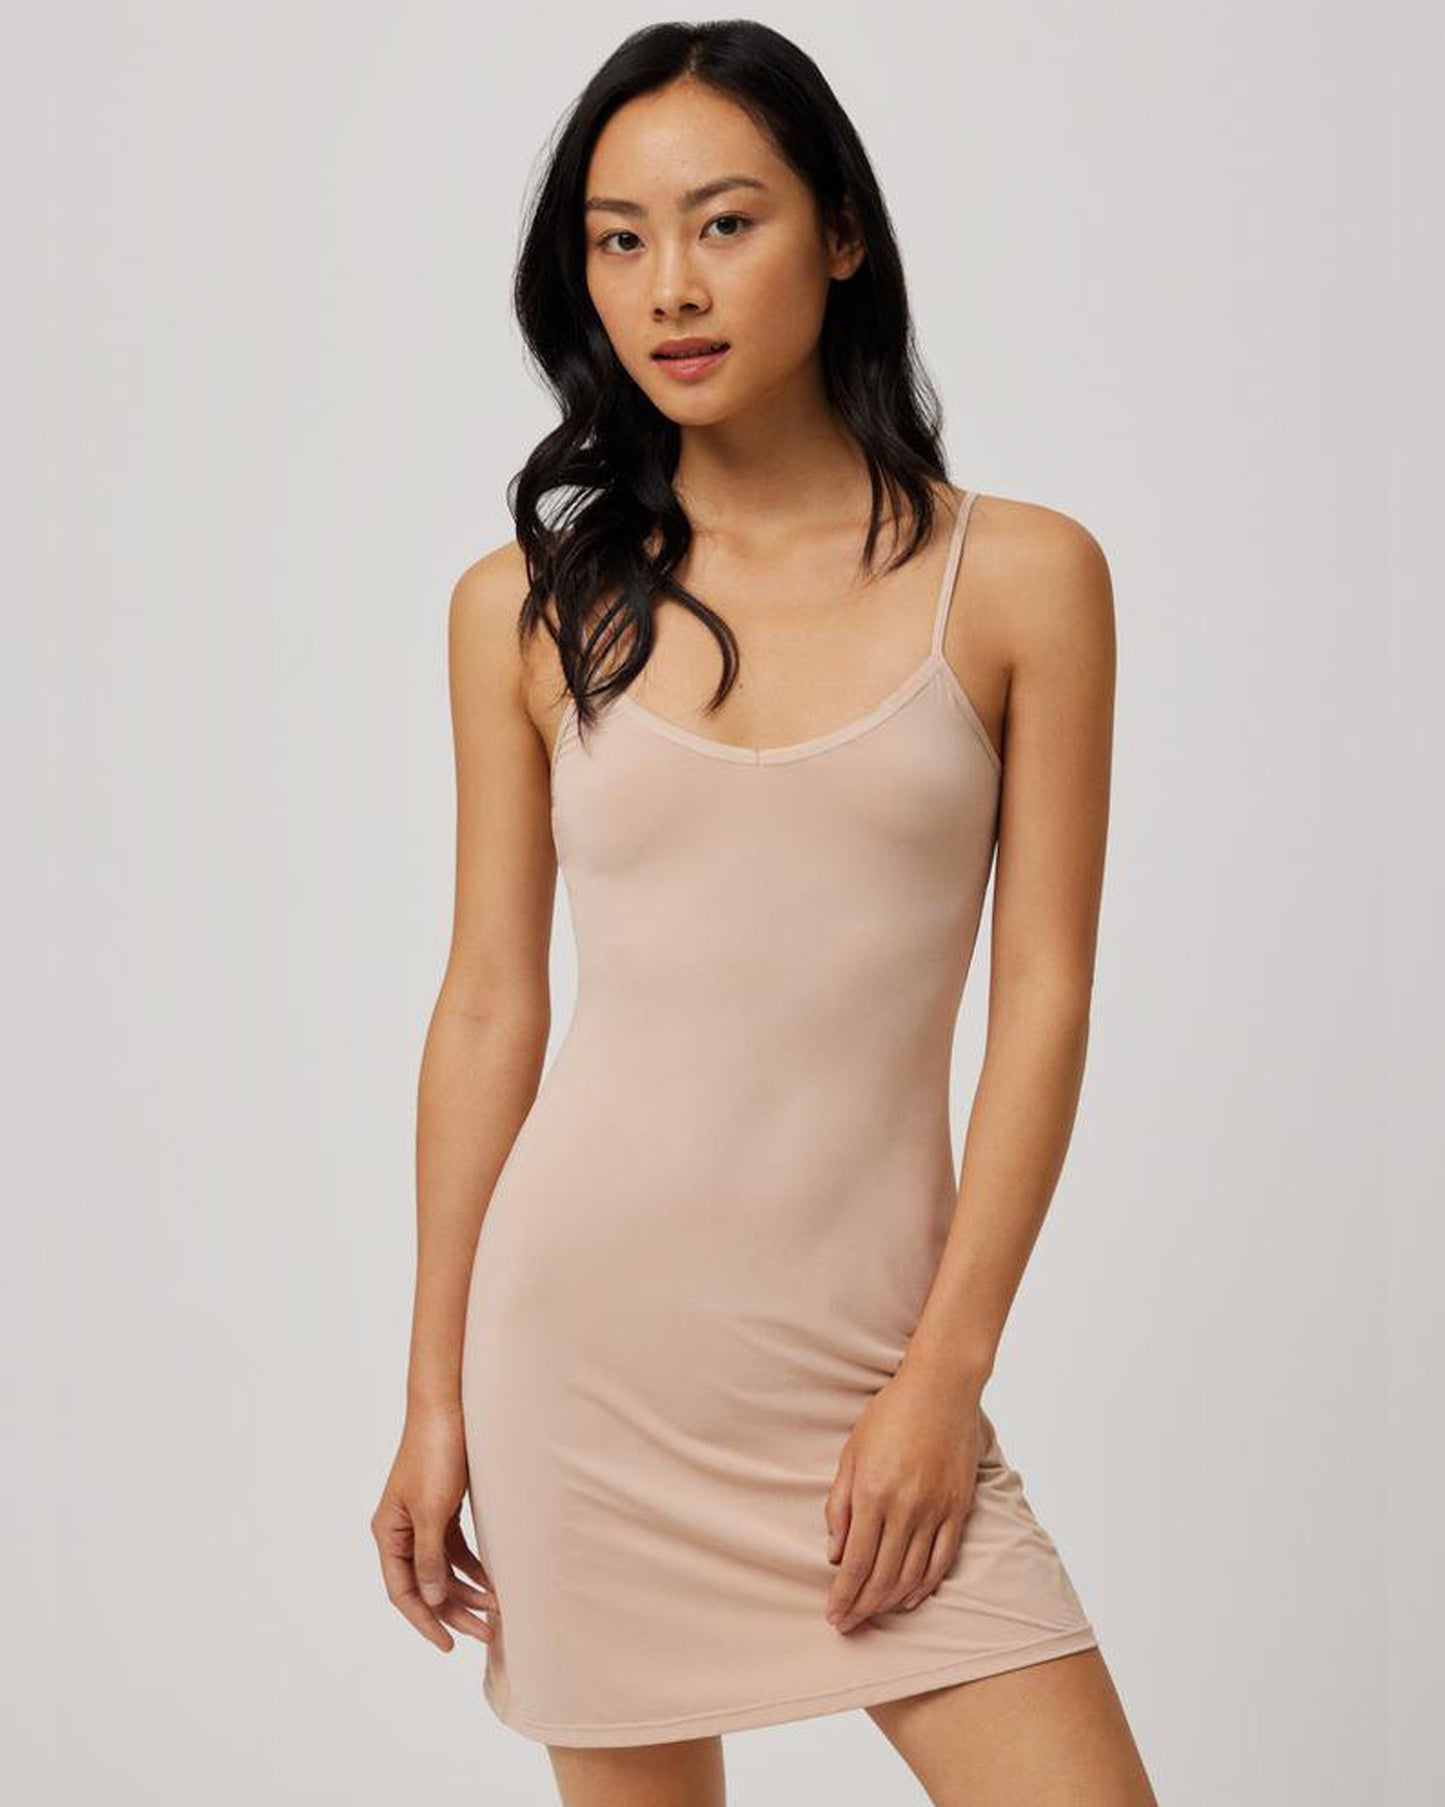 Ysabel Mora 19964 Slip Dress - Basic nude v-neck slip dress made of light microfibre fabric with adjustable straps for better fit, comfort and support. A great base layer to wear under dresses.